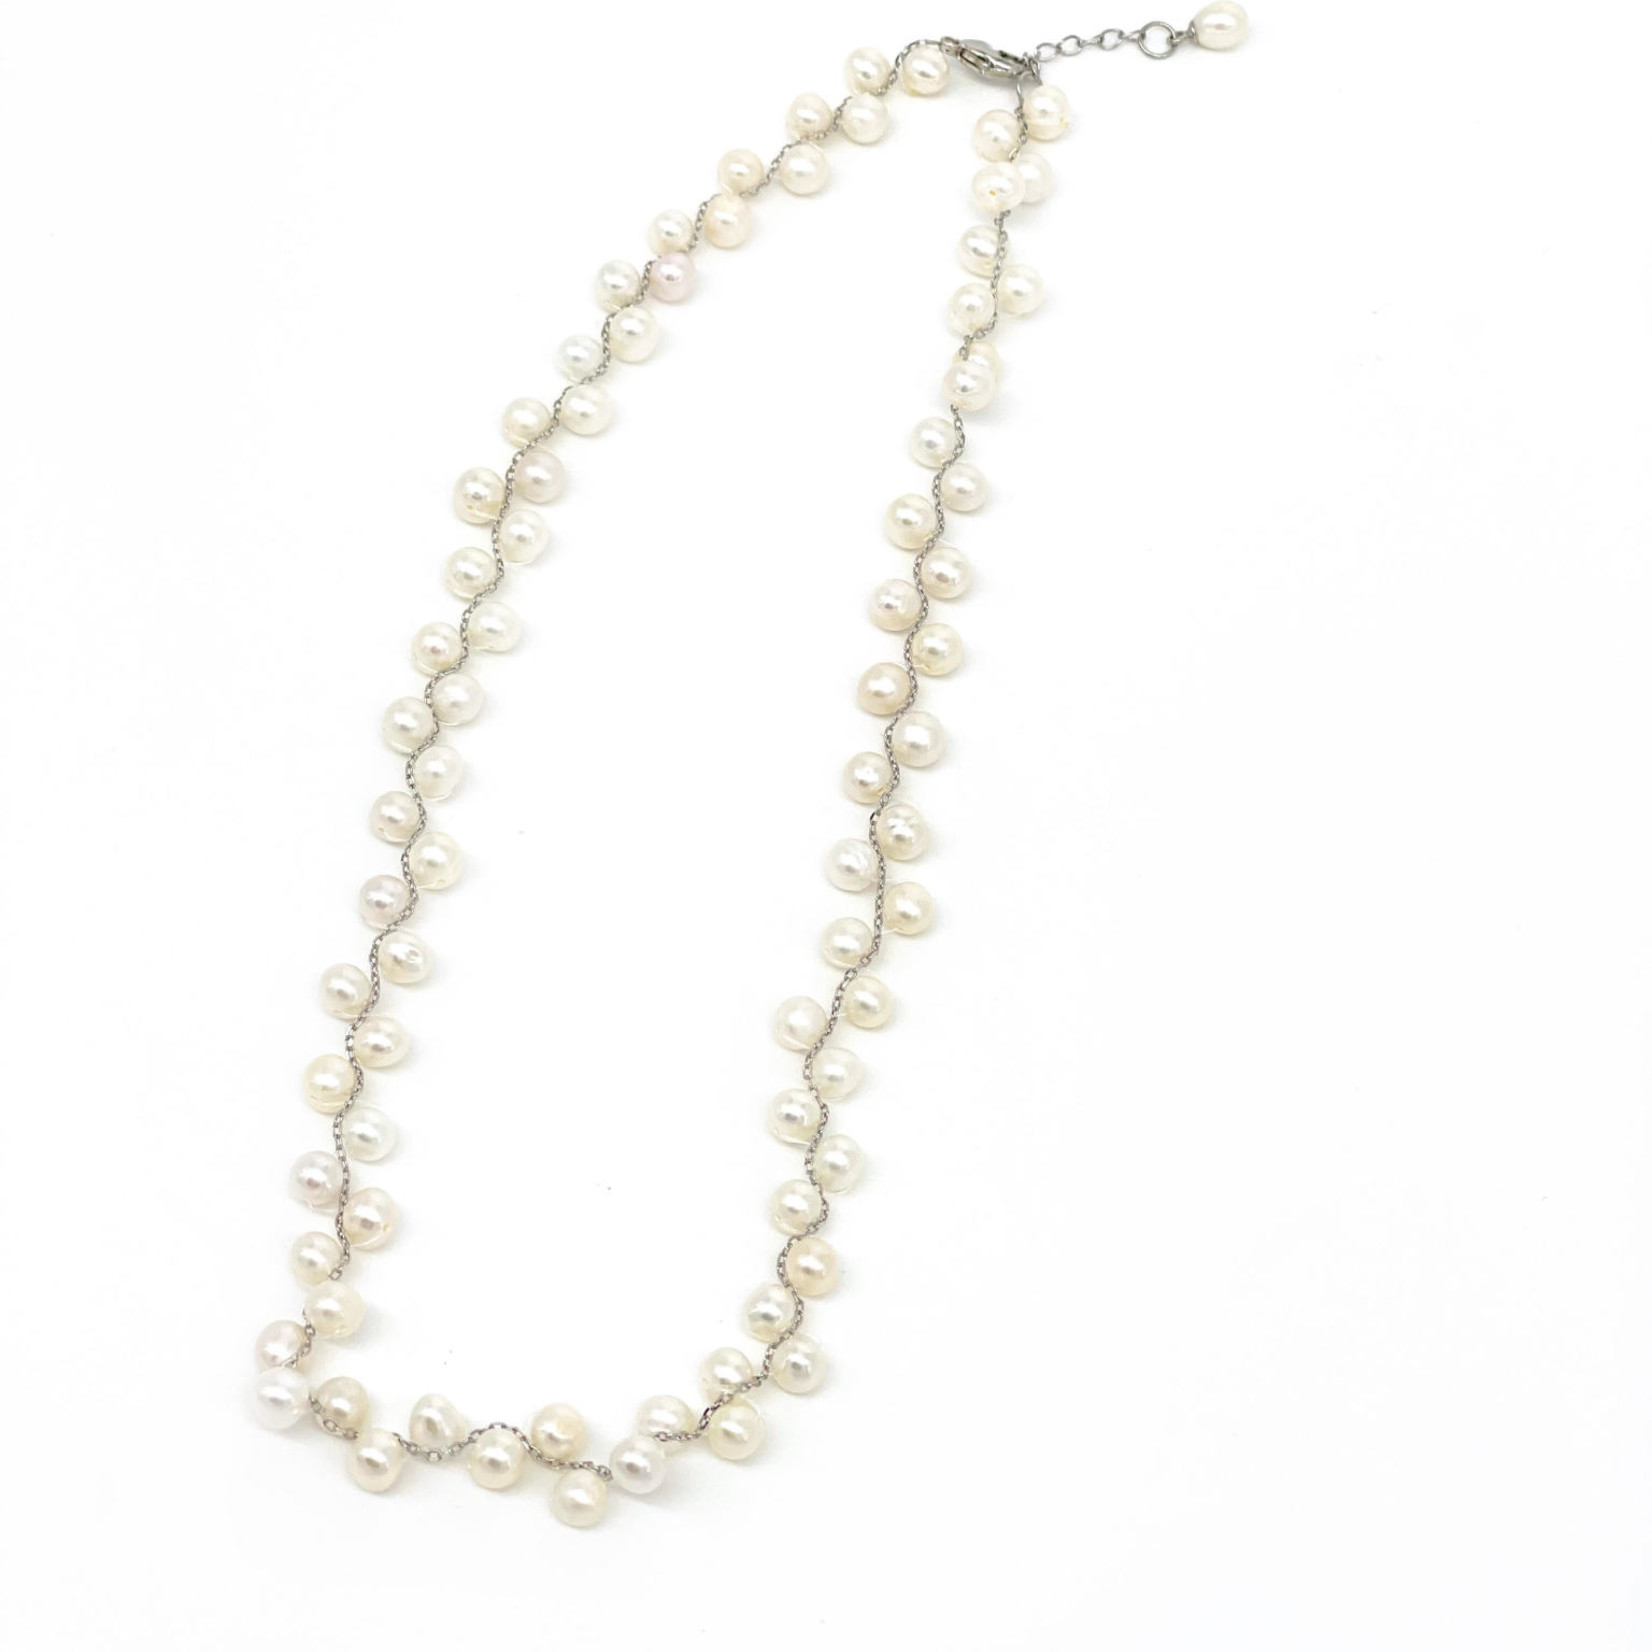 5.5-6mm 16-17" Sterling Silver Chain Braided Pearl Necklace